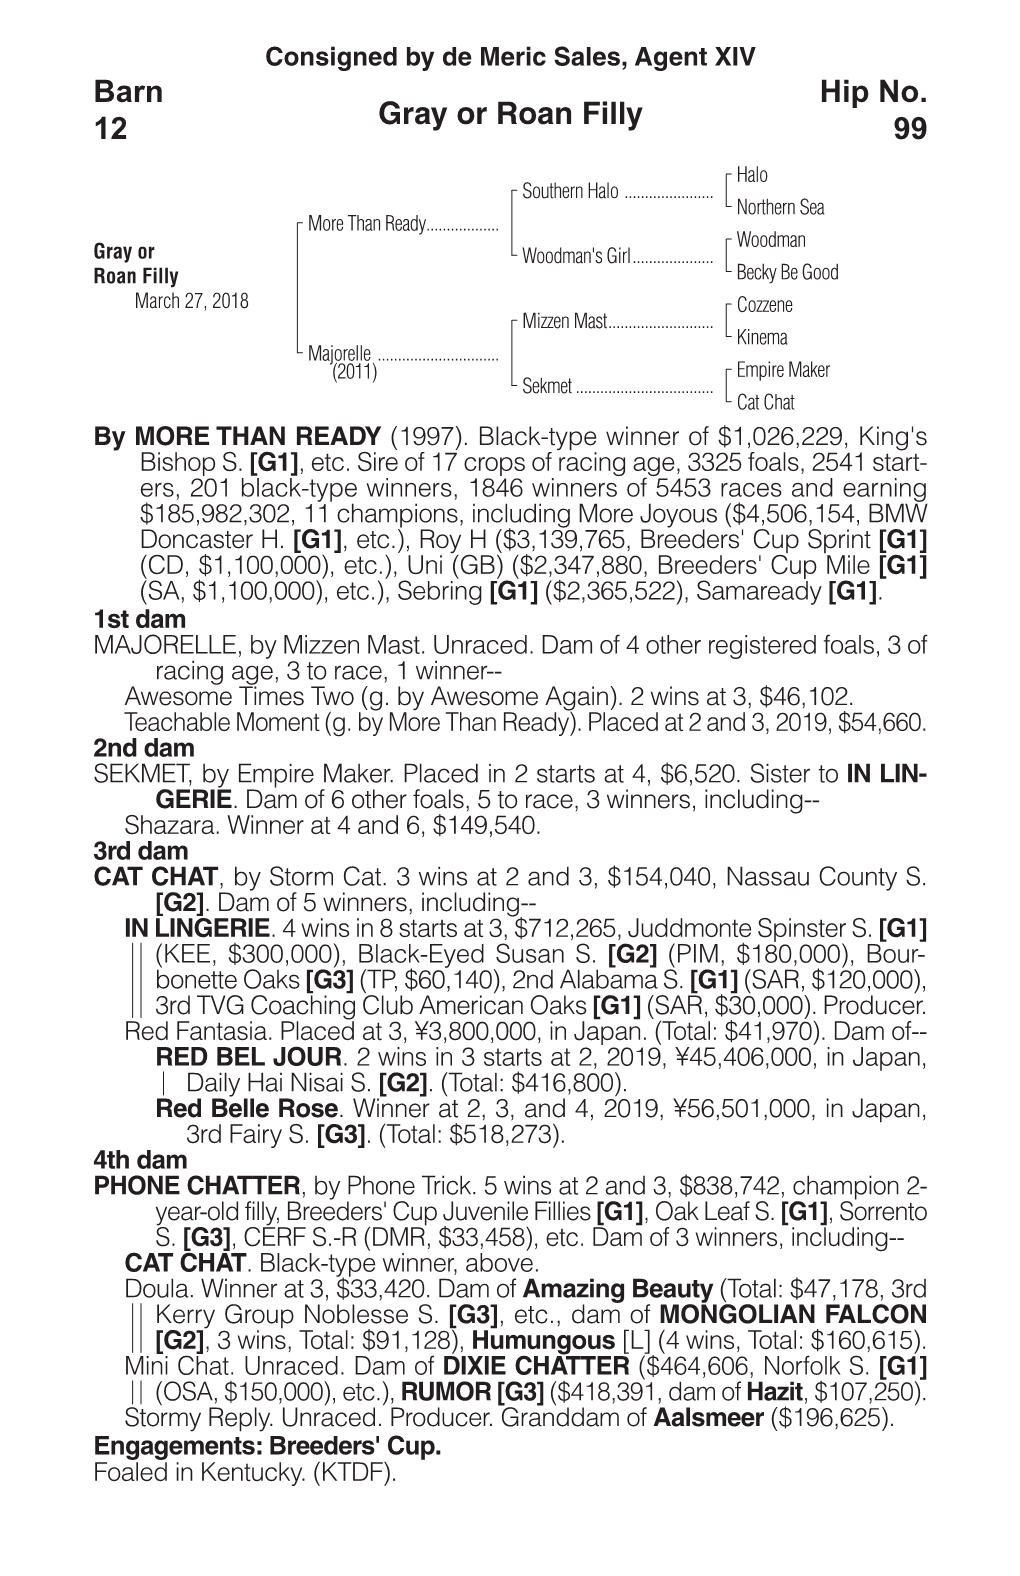 Gray Or Roan Filly Barn 12 Hip No. 99